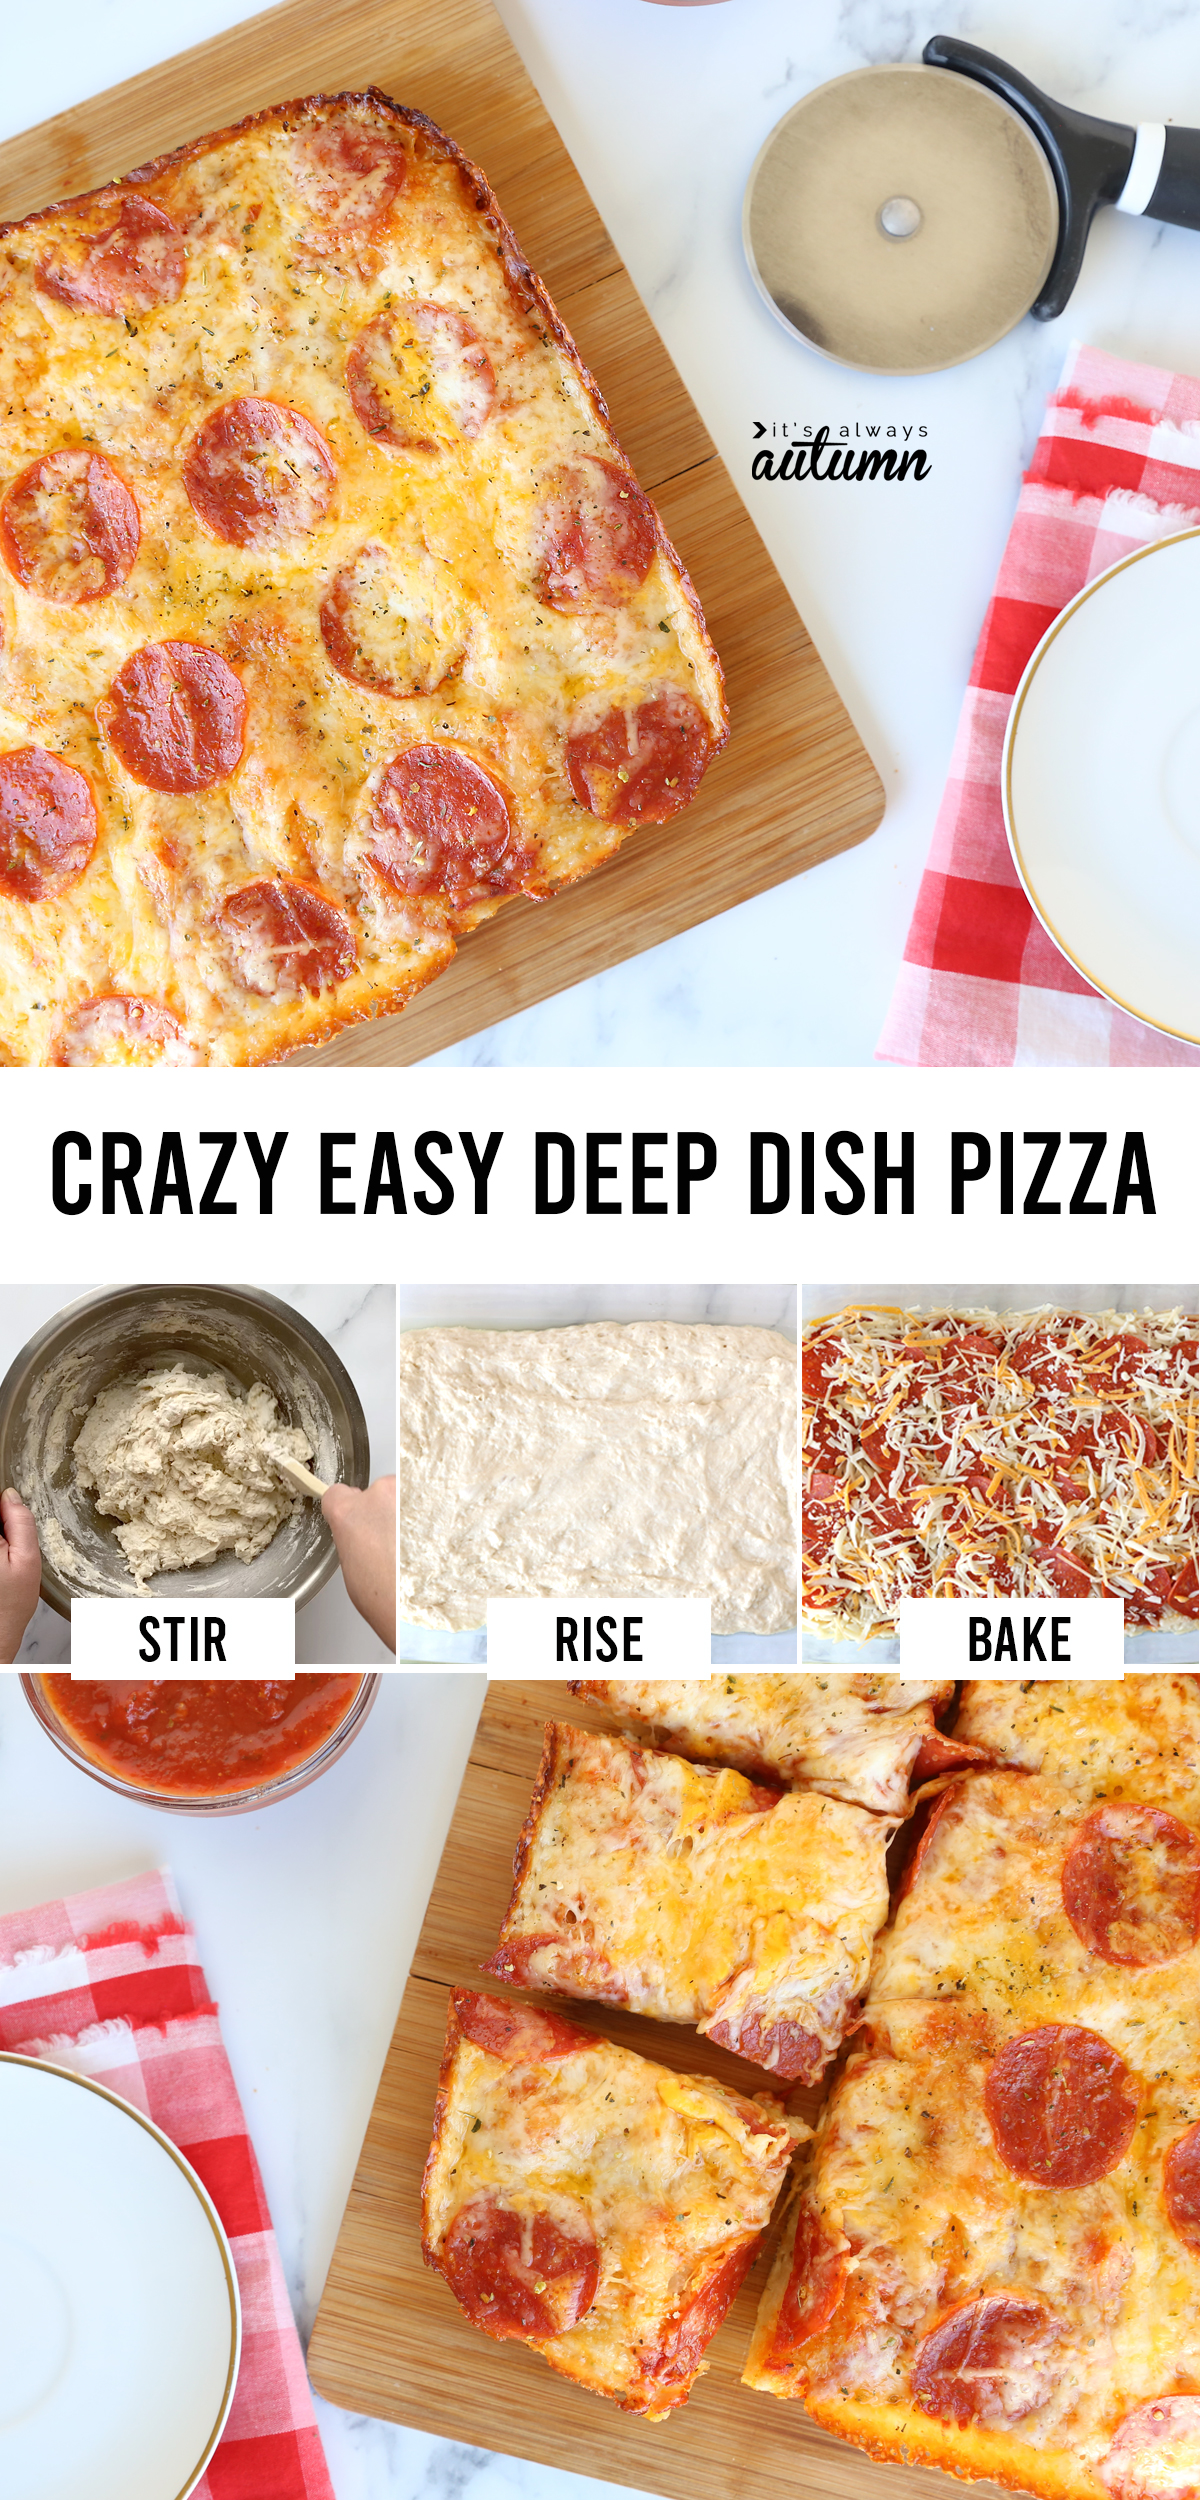 This crazy easy deep dish pizza has a gorgeous this crust that's made with just 4 ingredients!